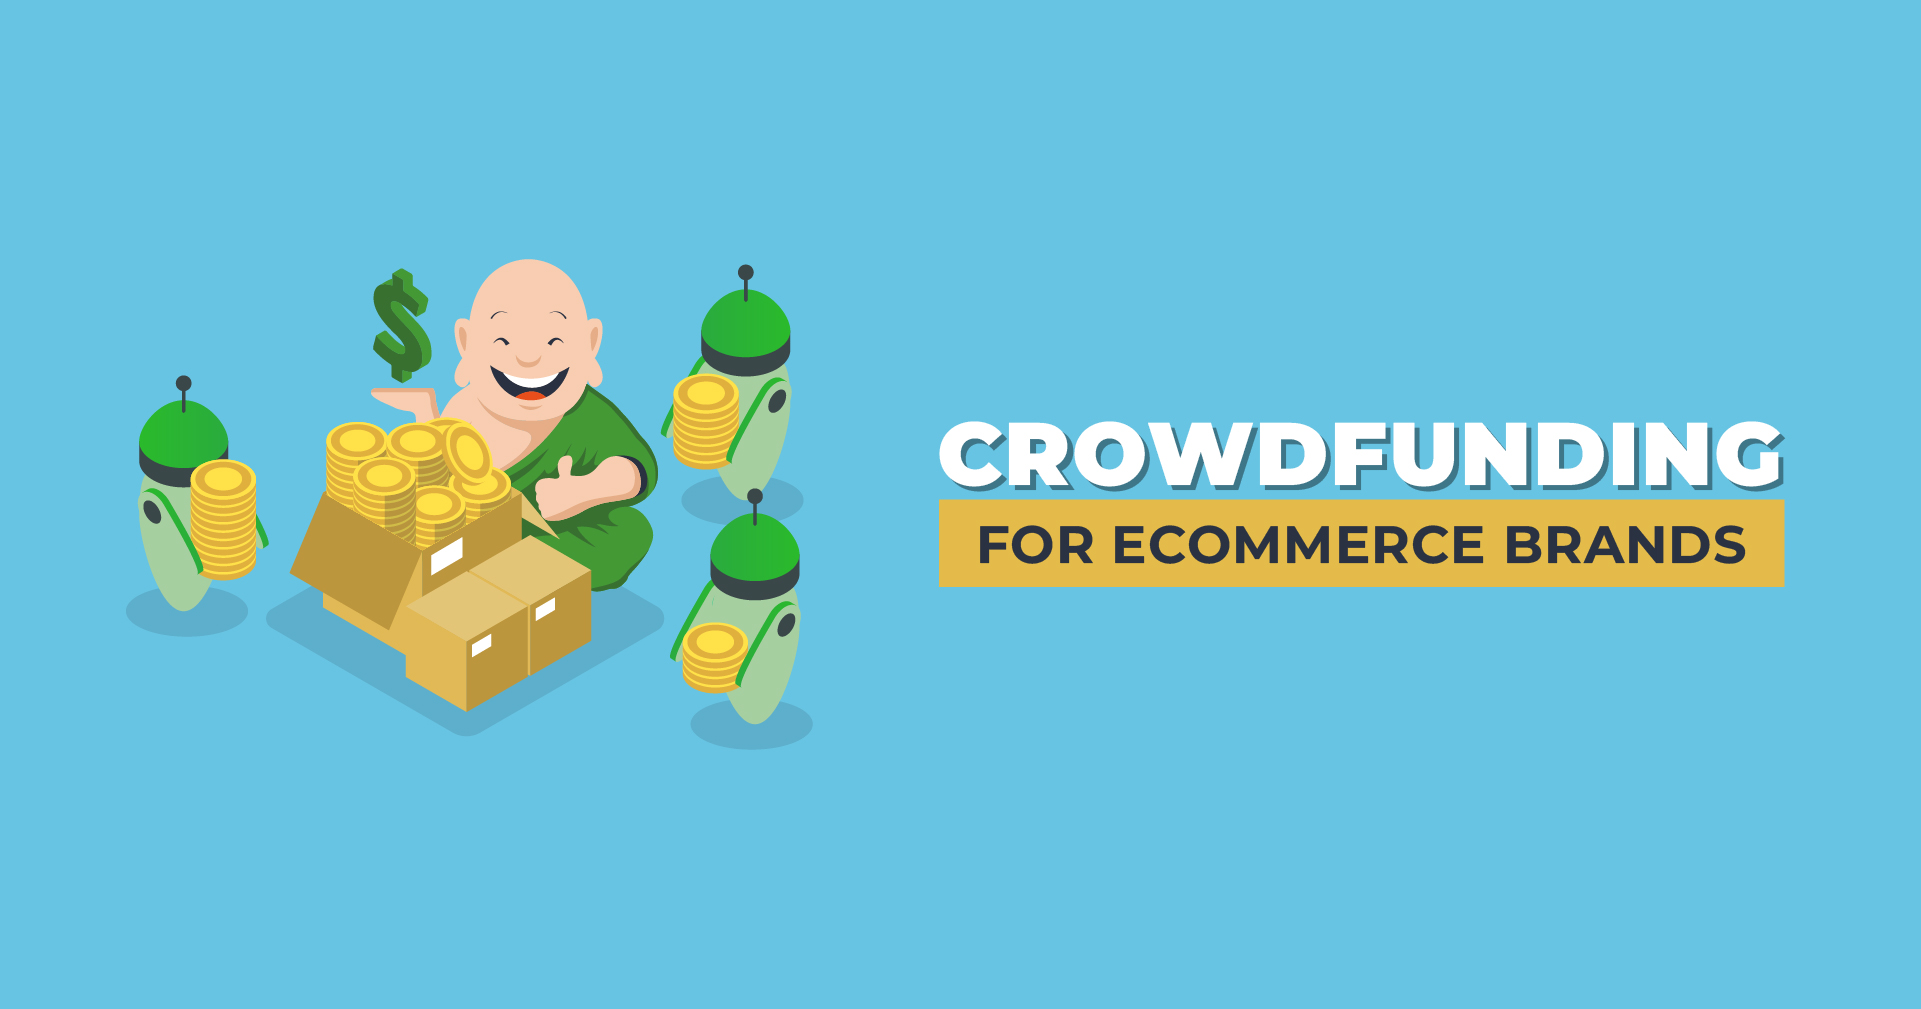 Crowdfunding for Ecommerce Brands